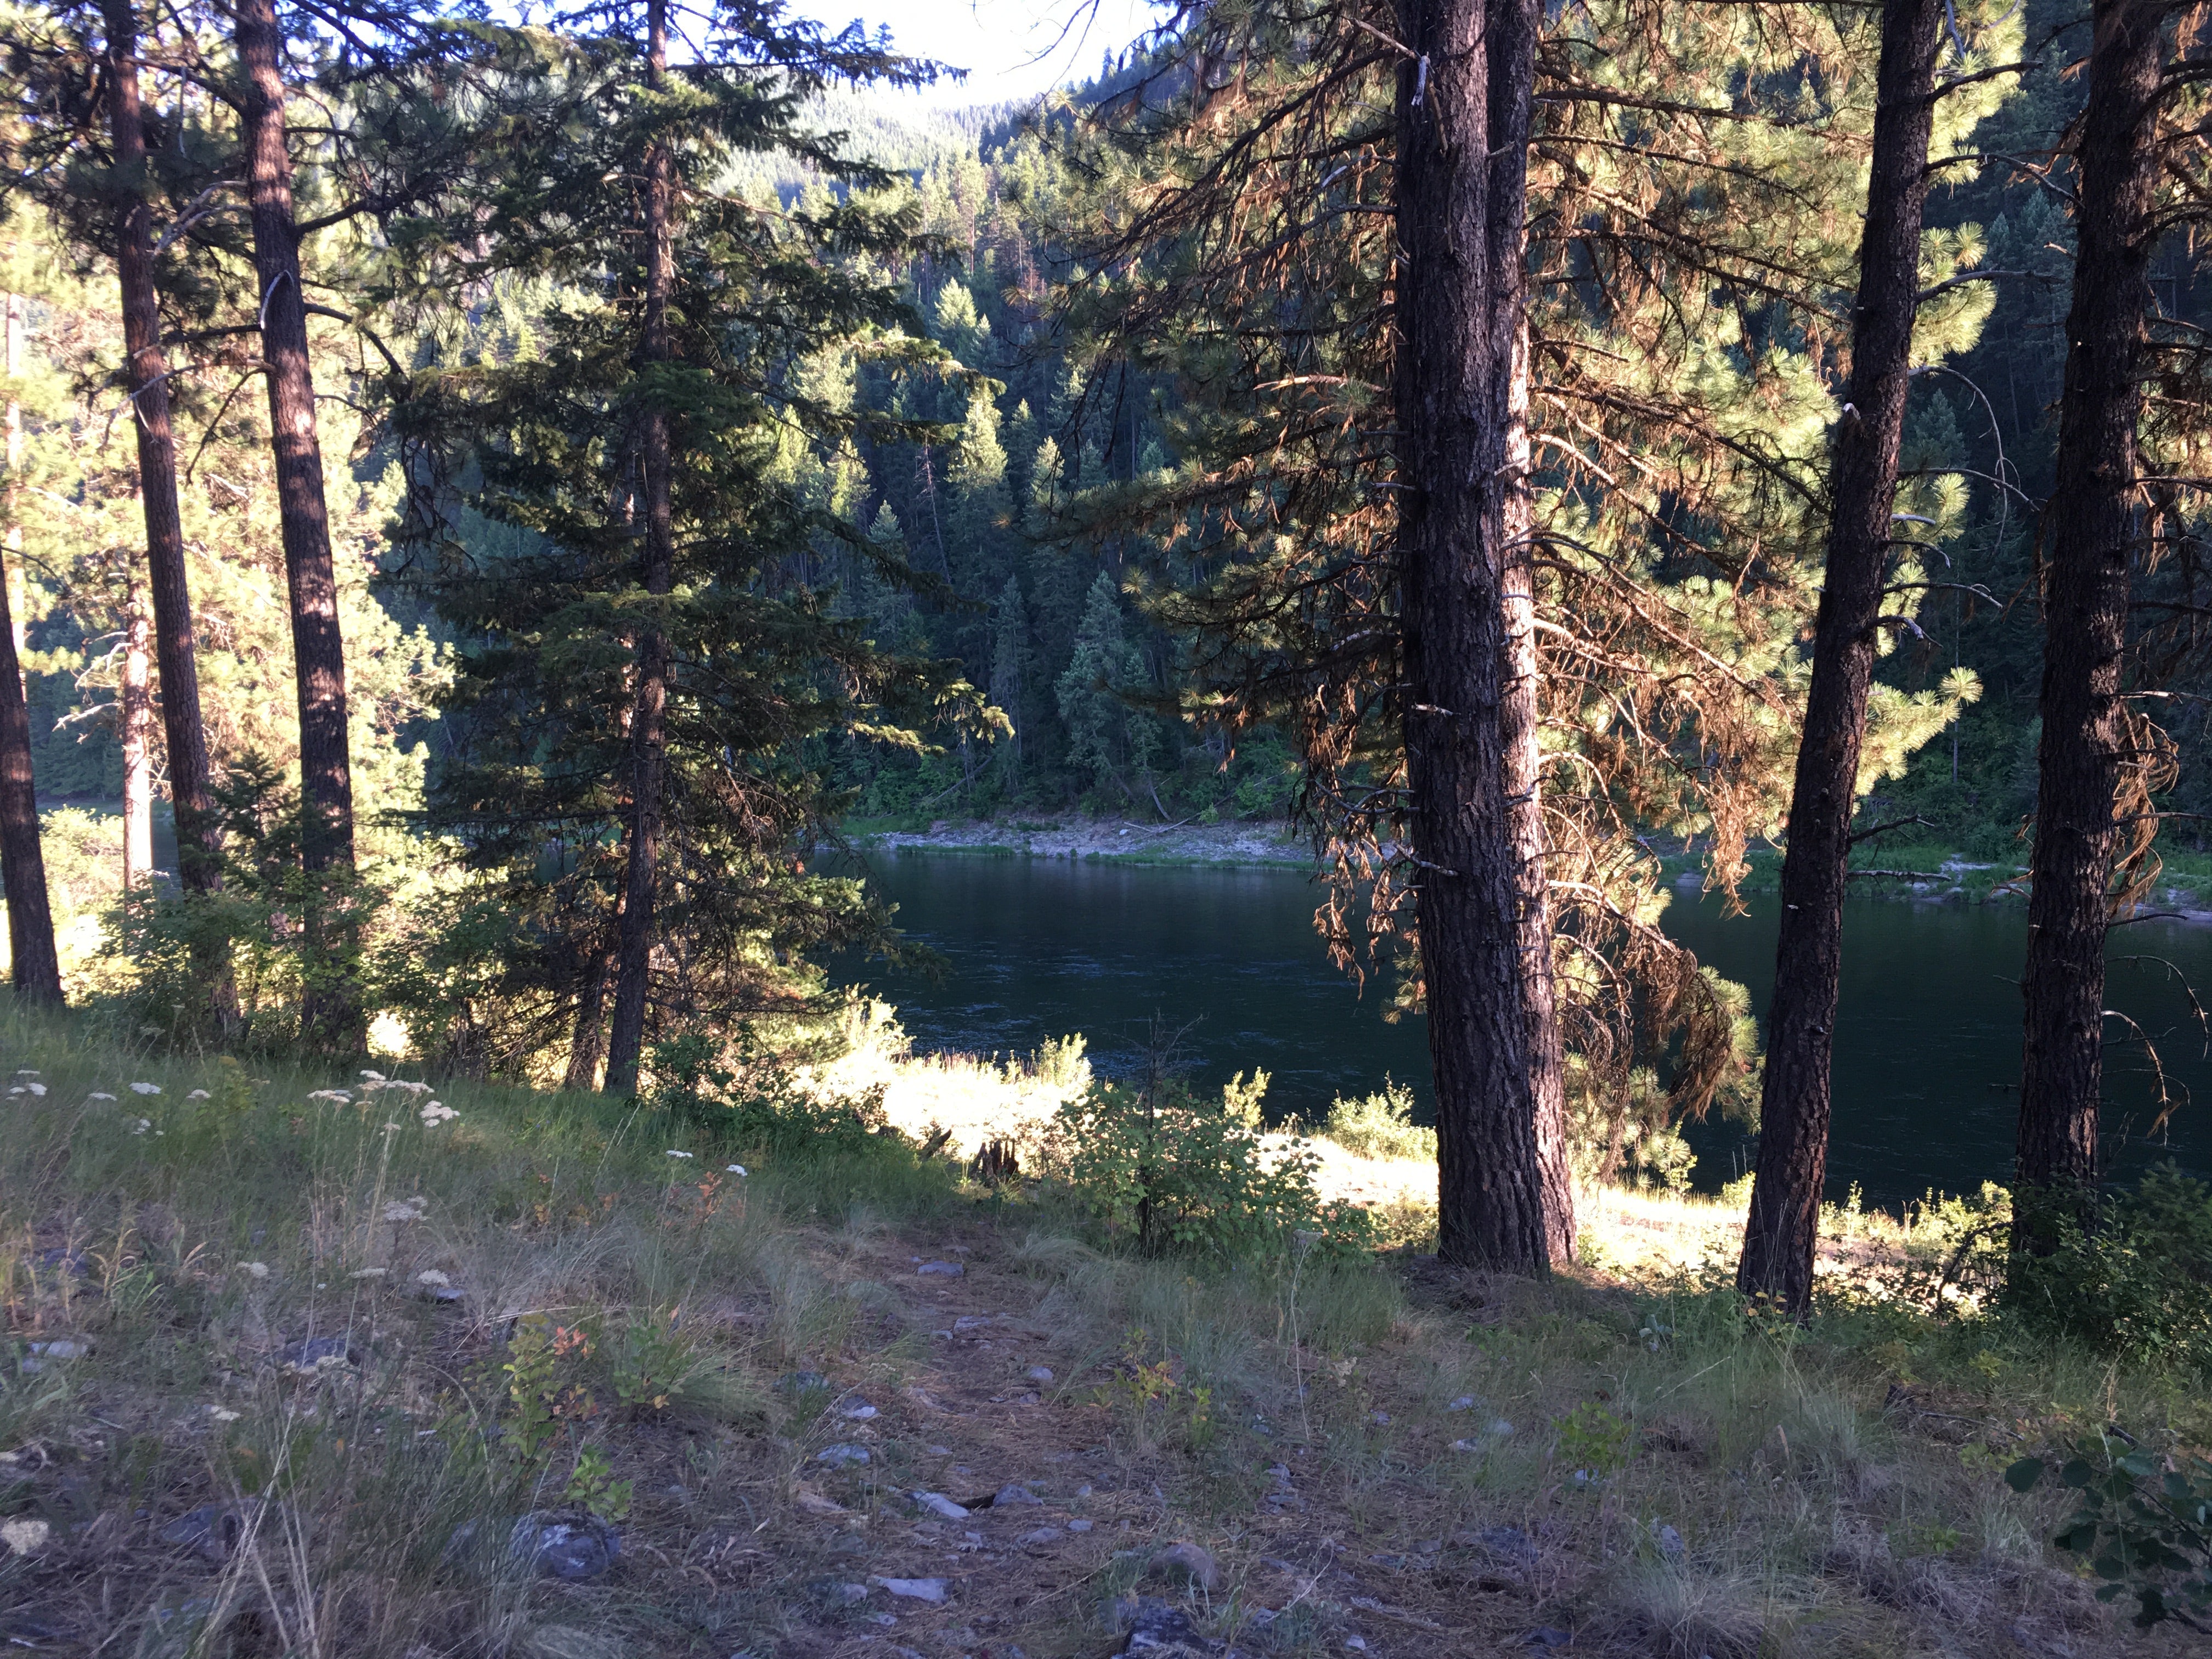 Camper submitted image from National Forest Recreation Area - Peninsula - 2